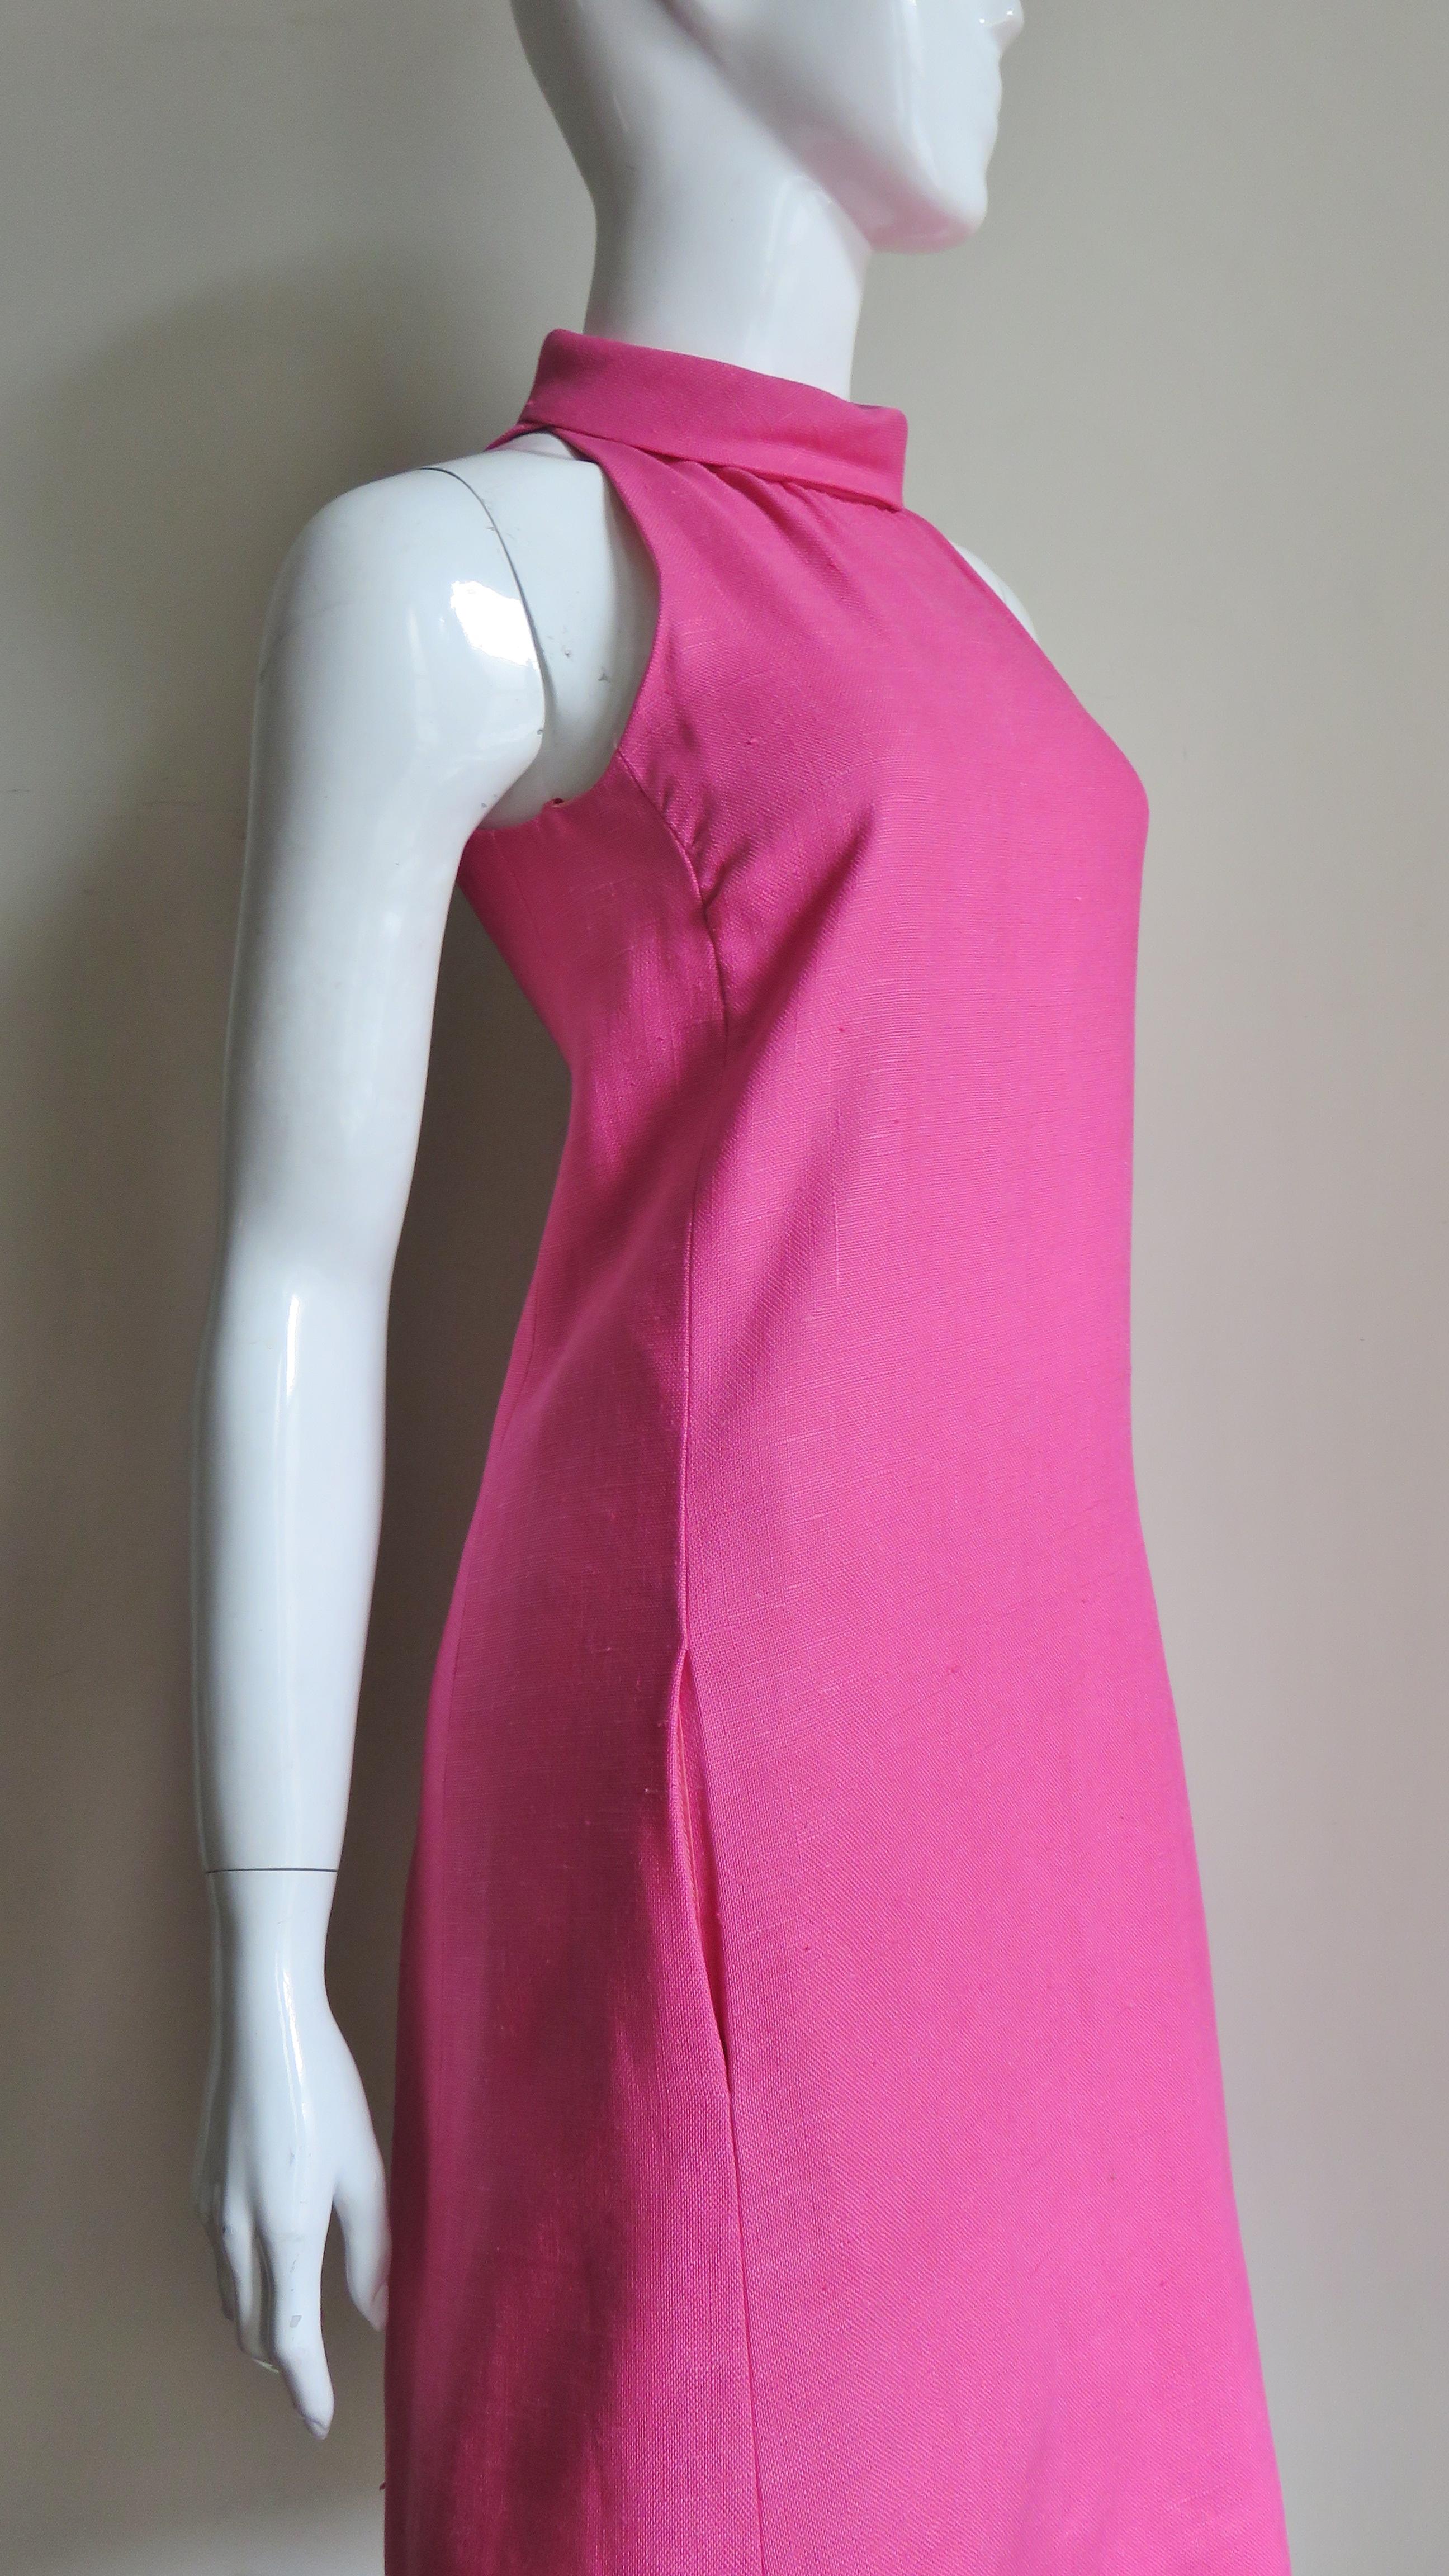 B H Wragge 1967 Linen Dress with Cutout Back For Sale 2